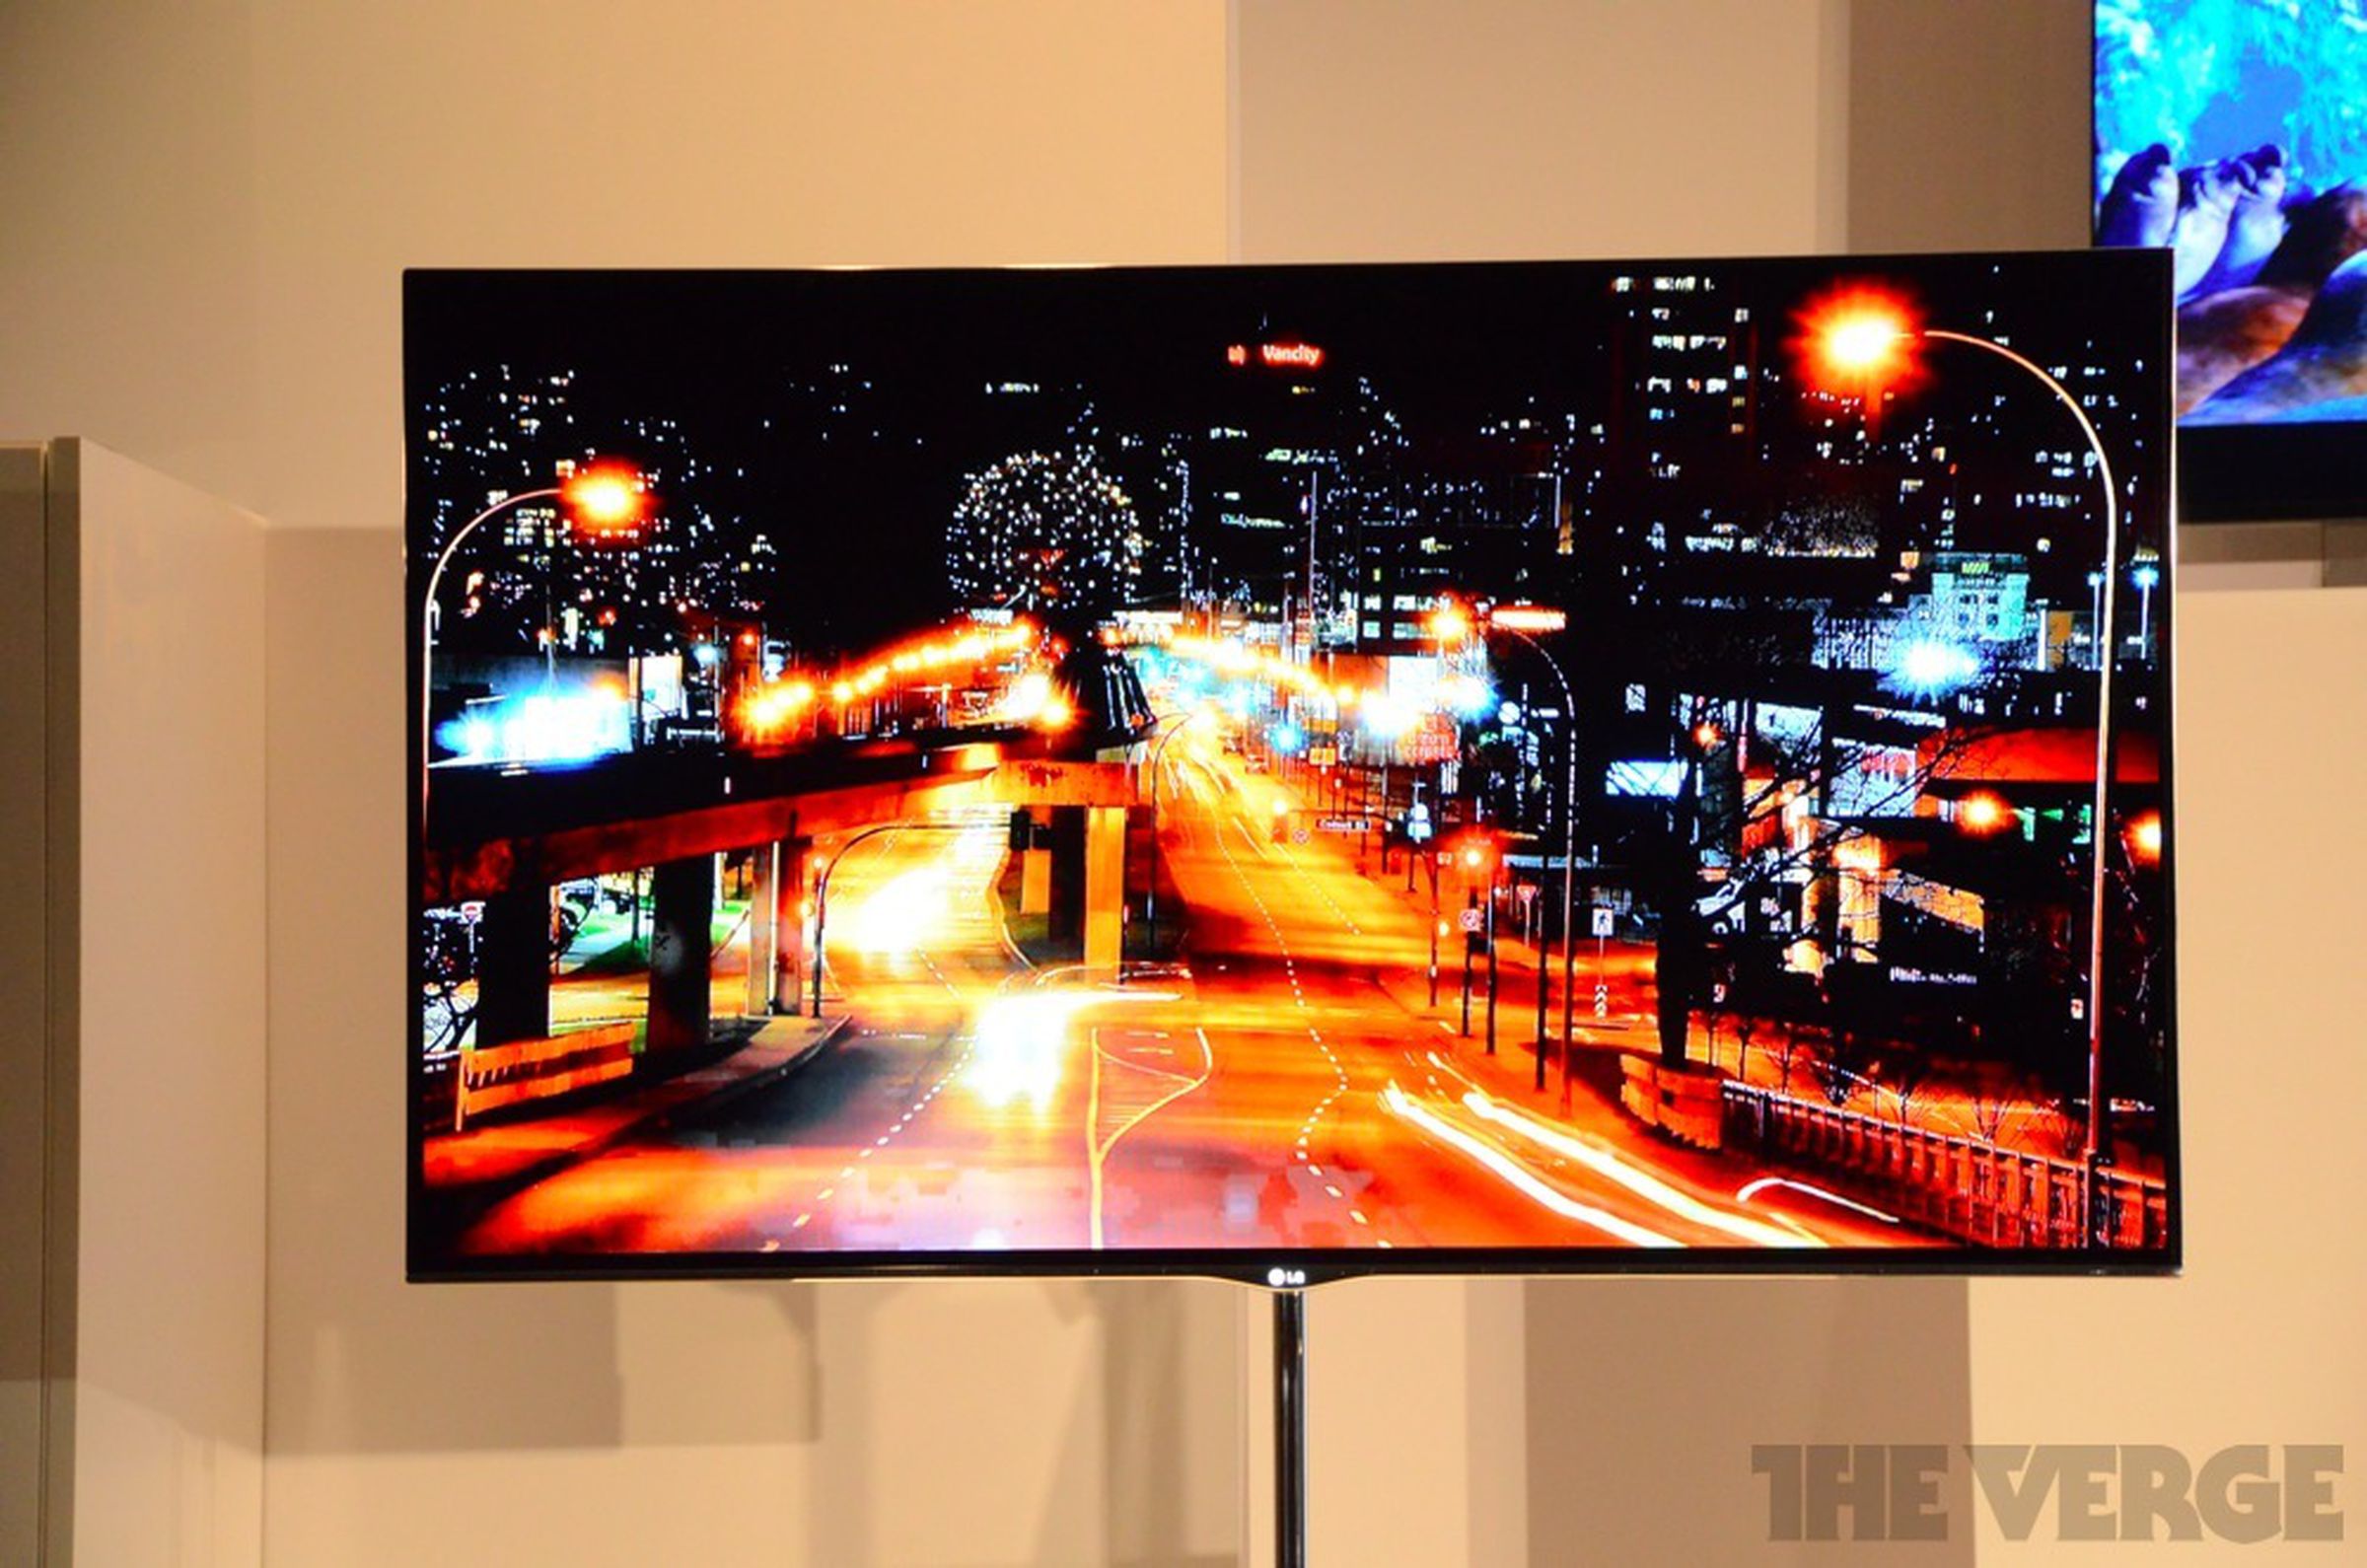 LG 55-inch OLED TV hands-on pictures